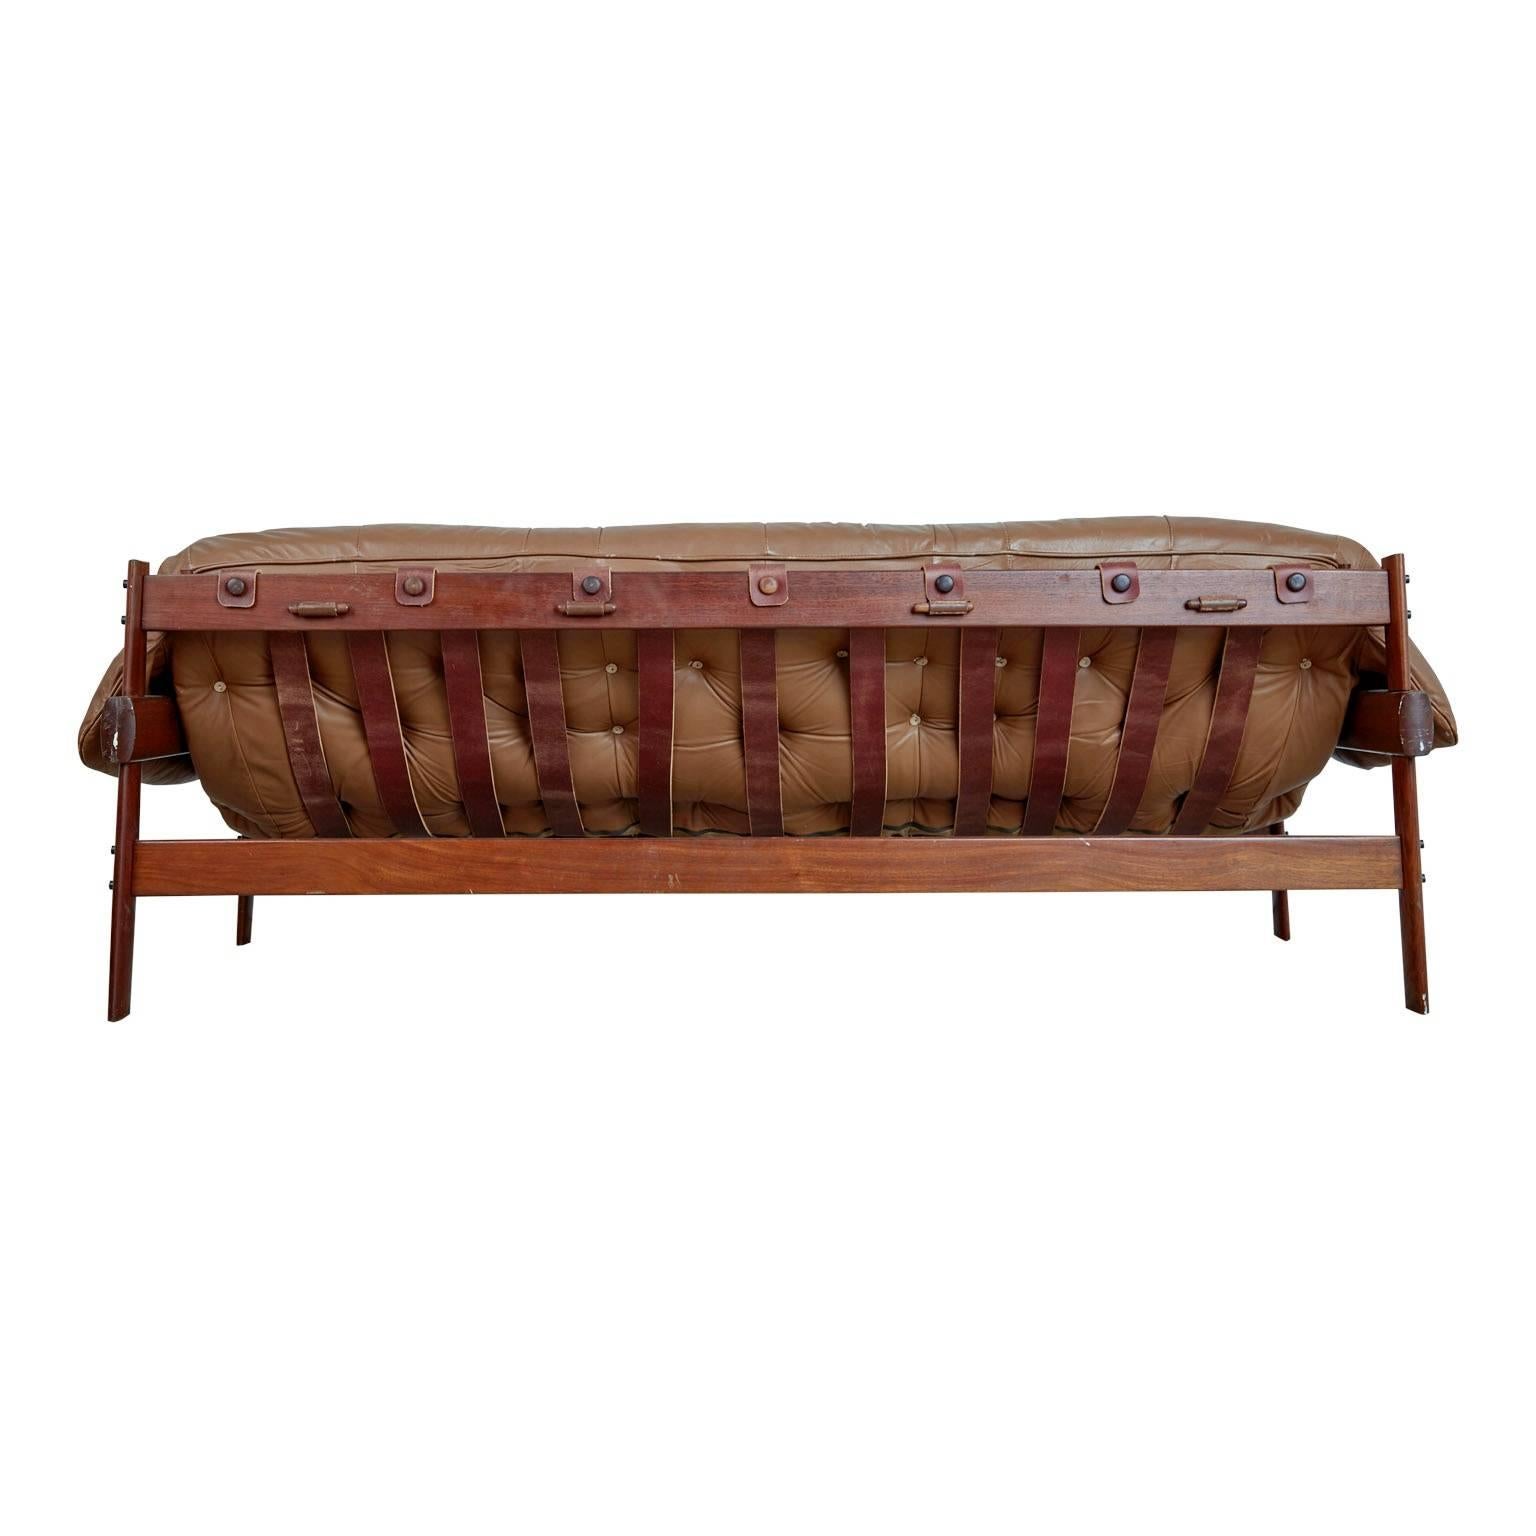 Brazilian Percival Lafer Rosewood and Distressed Leather Tufted Sofa, Brazil, circa 1960